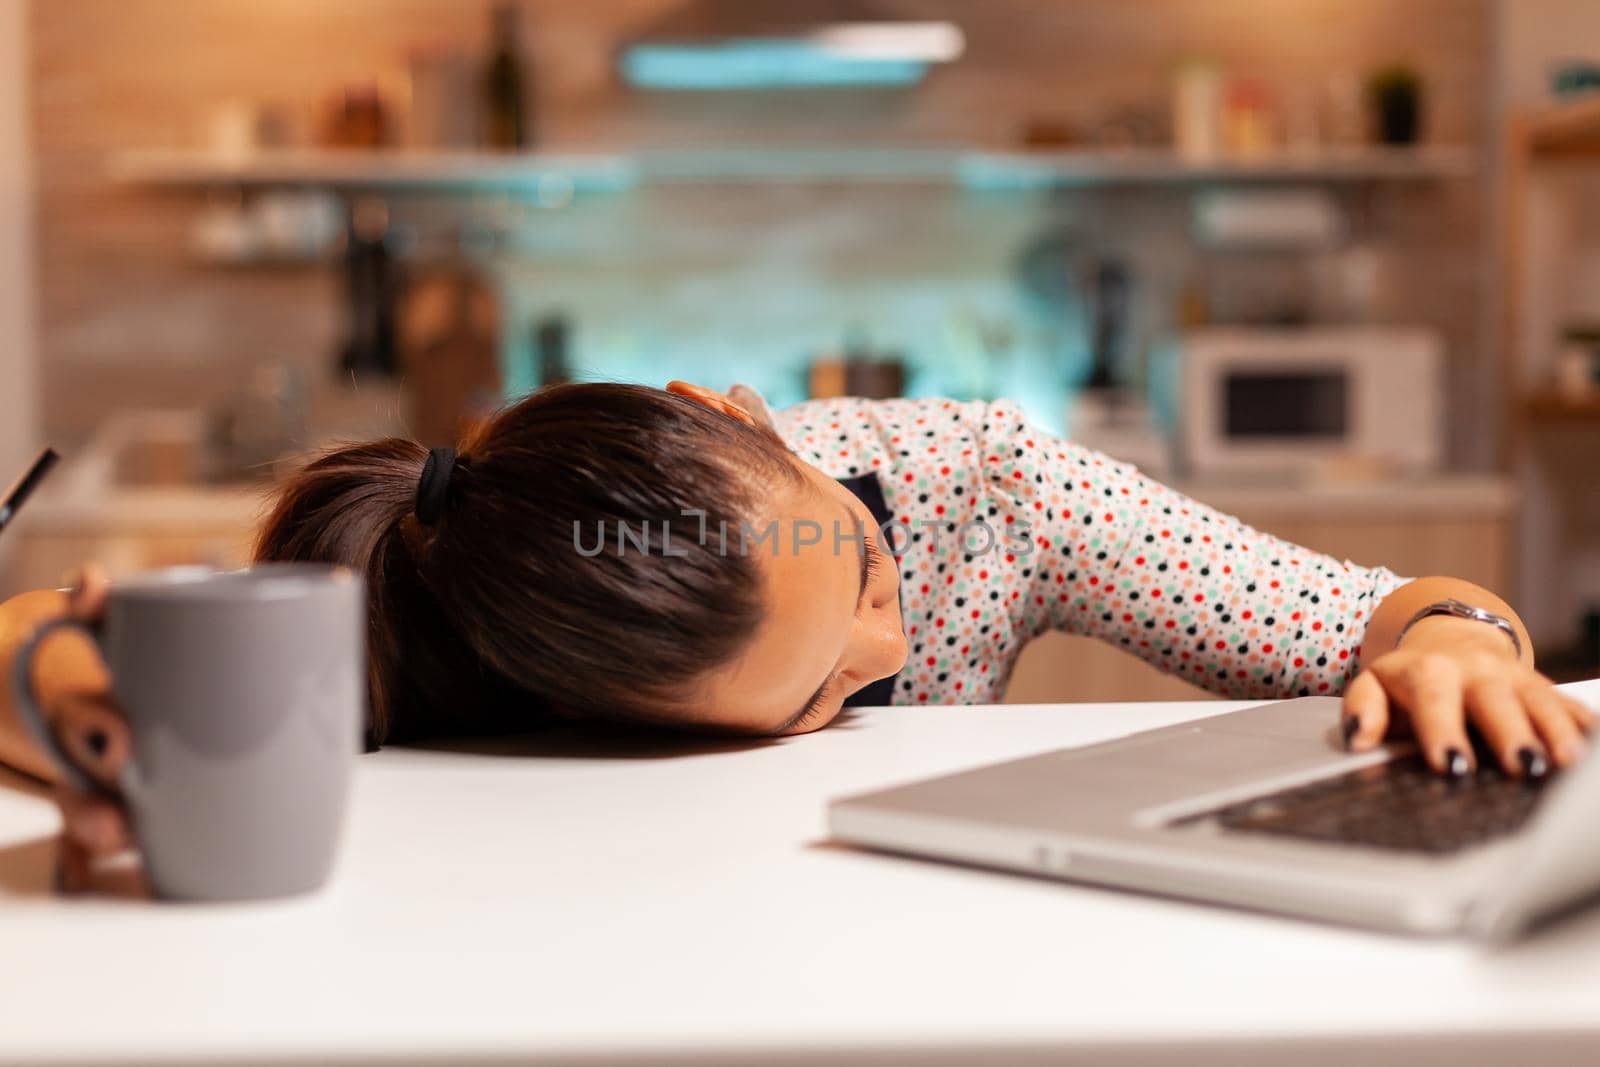 Freelance woman falling asleep in home kitchen by DCStudio